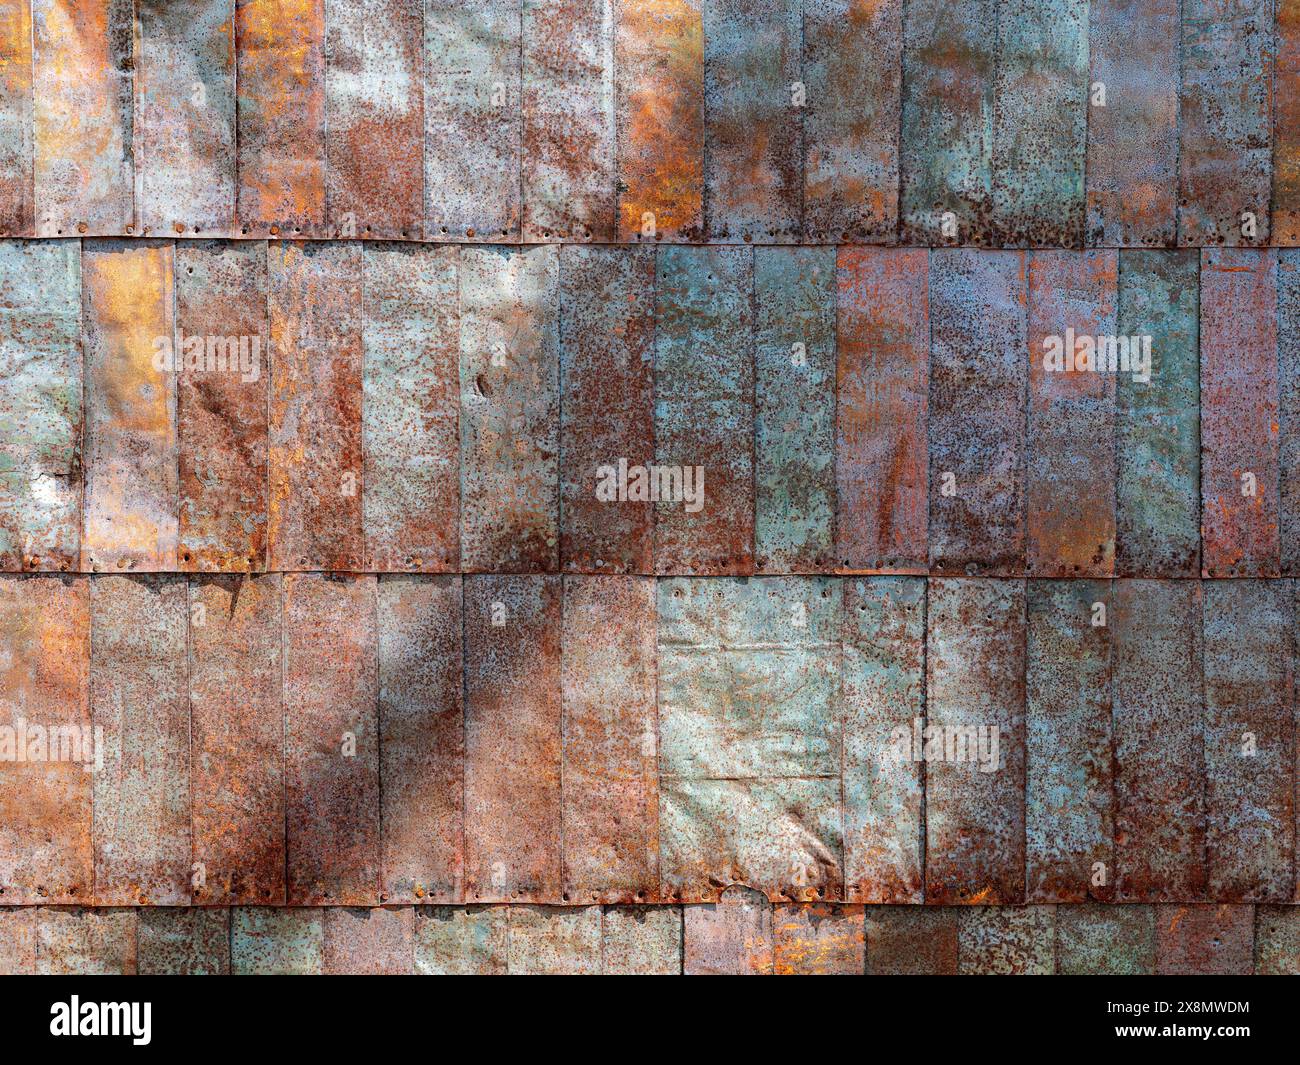 Backwoods shack siding rusted and with corrosion Stock Photo